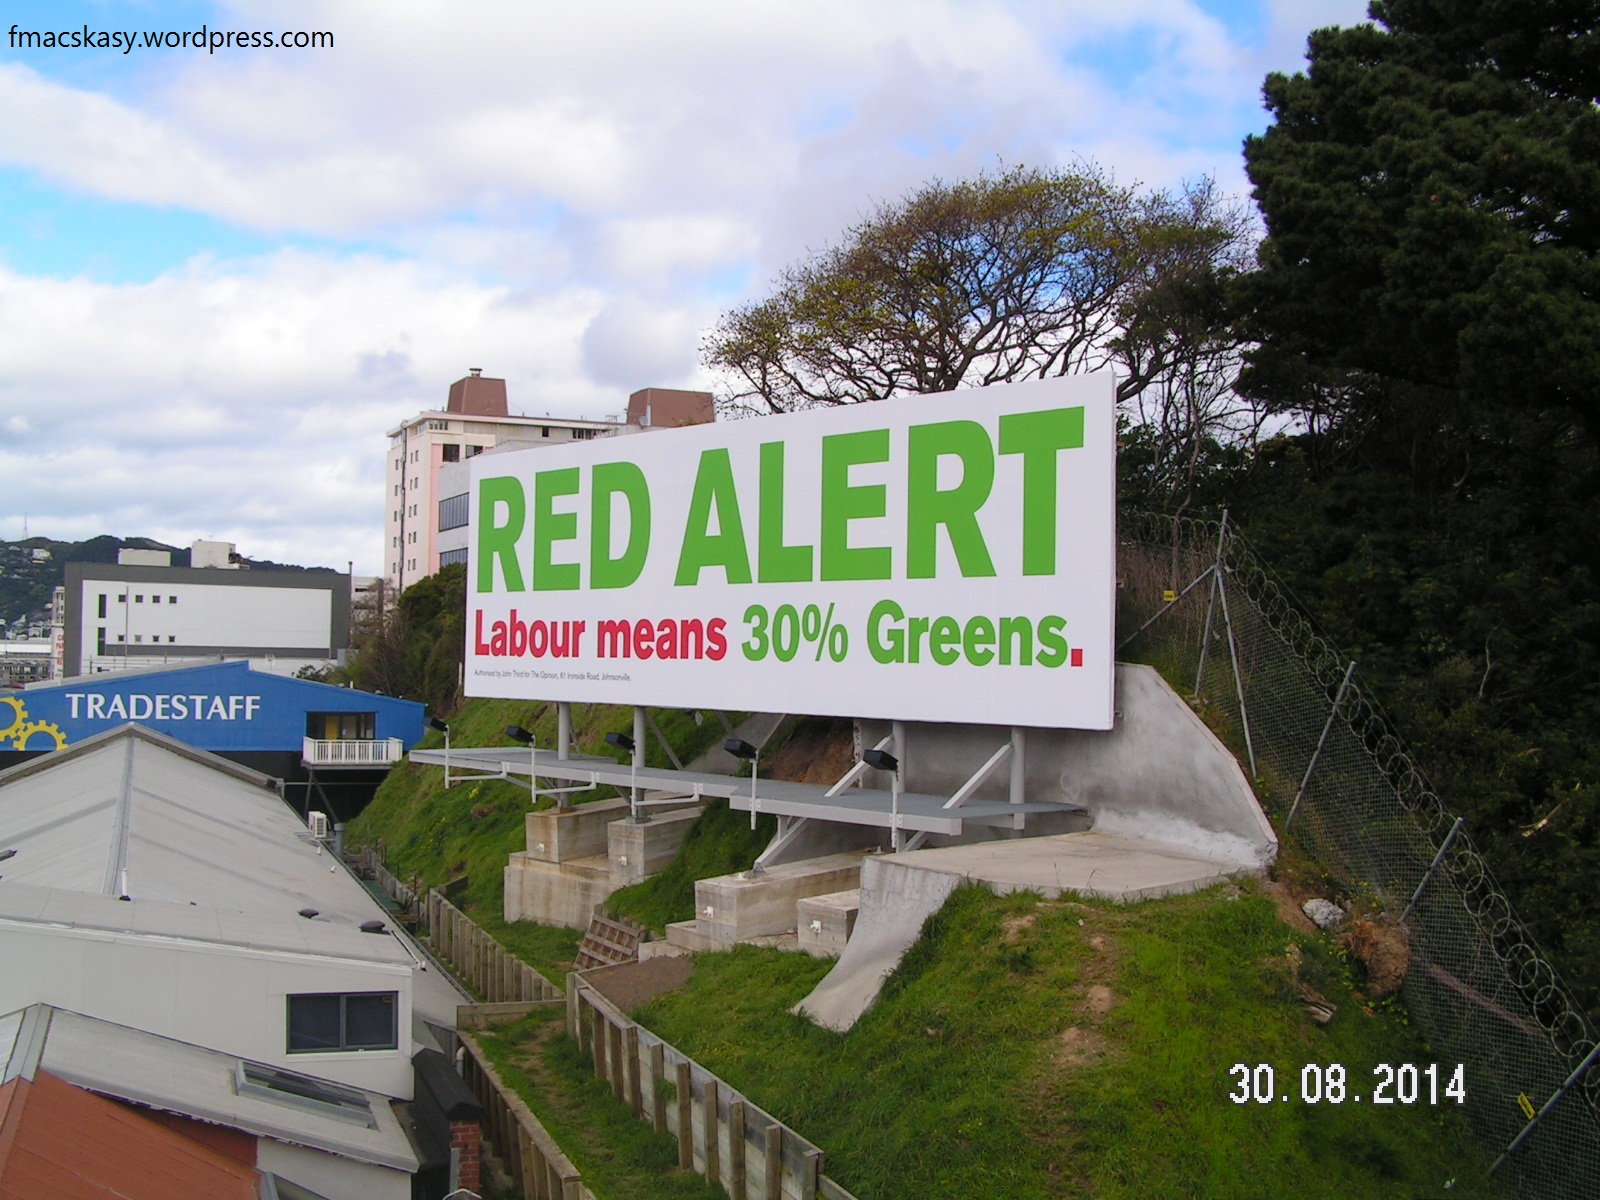 election billboards - hoardings - Greens - Labour - dirty politics